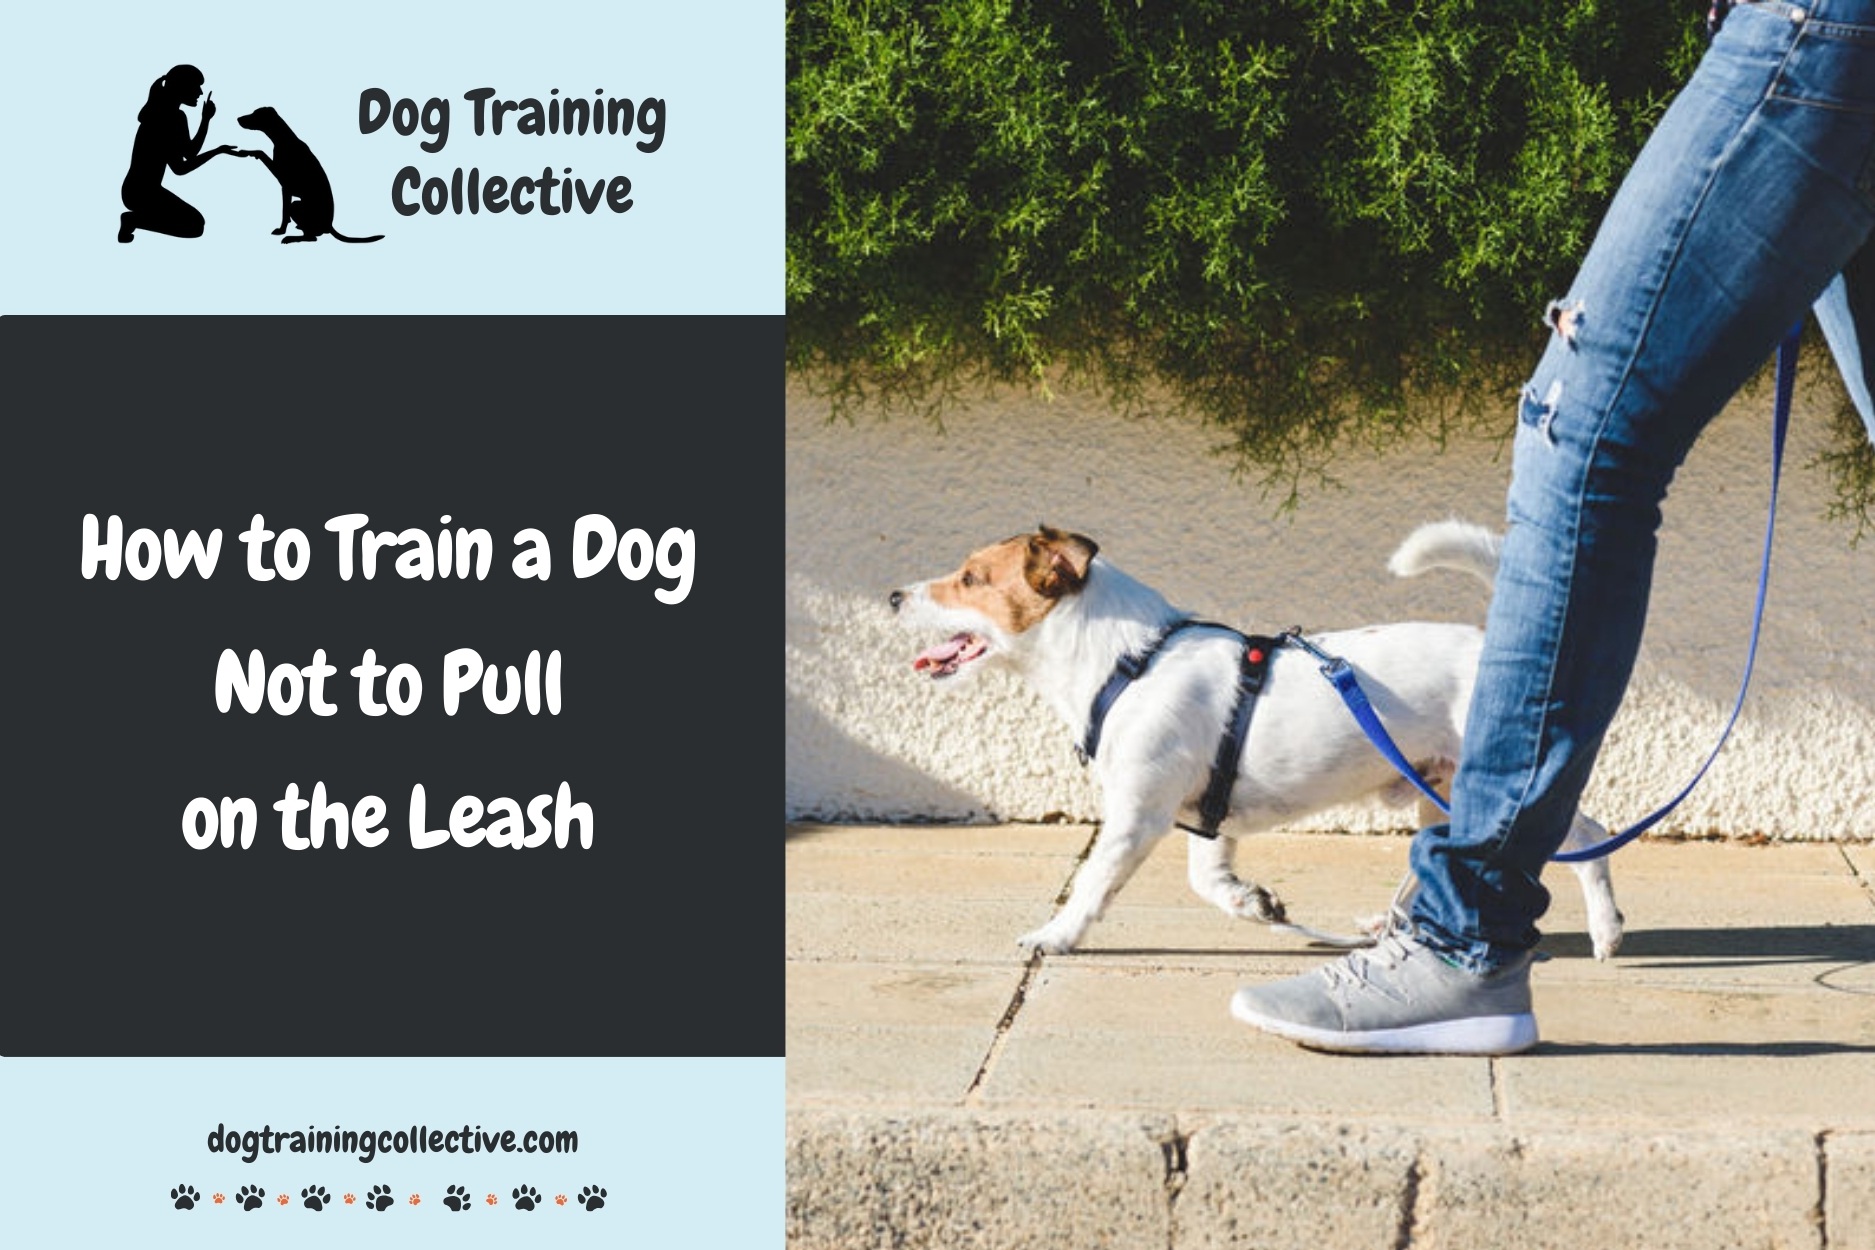 How to Train a Dog Not to Pull on the Leash